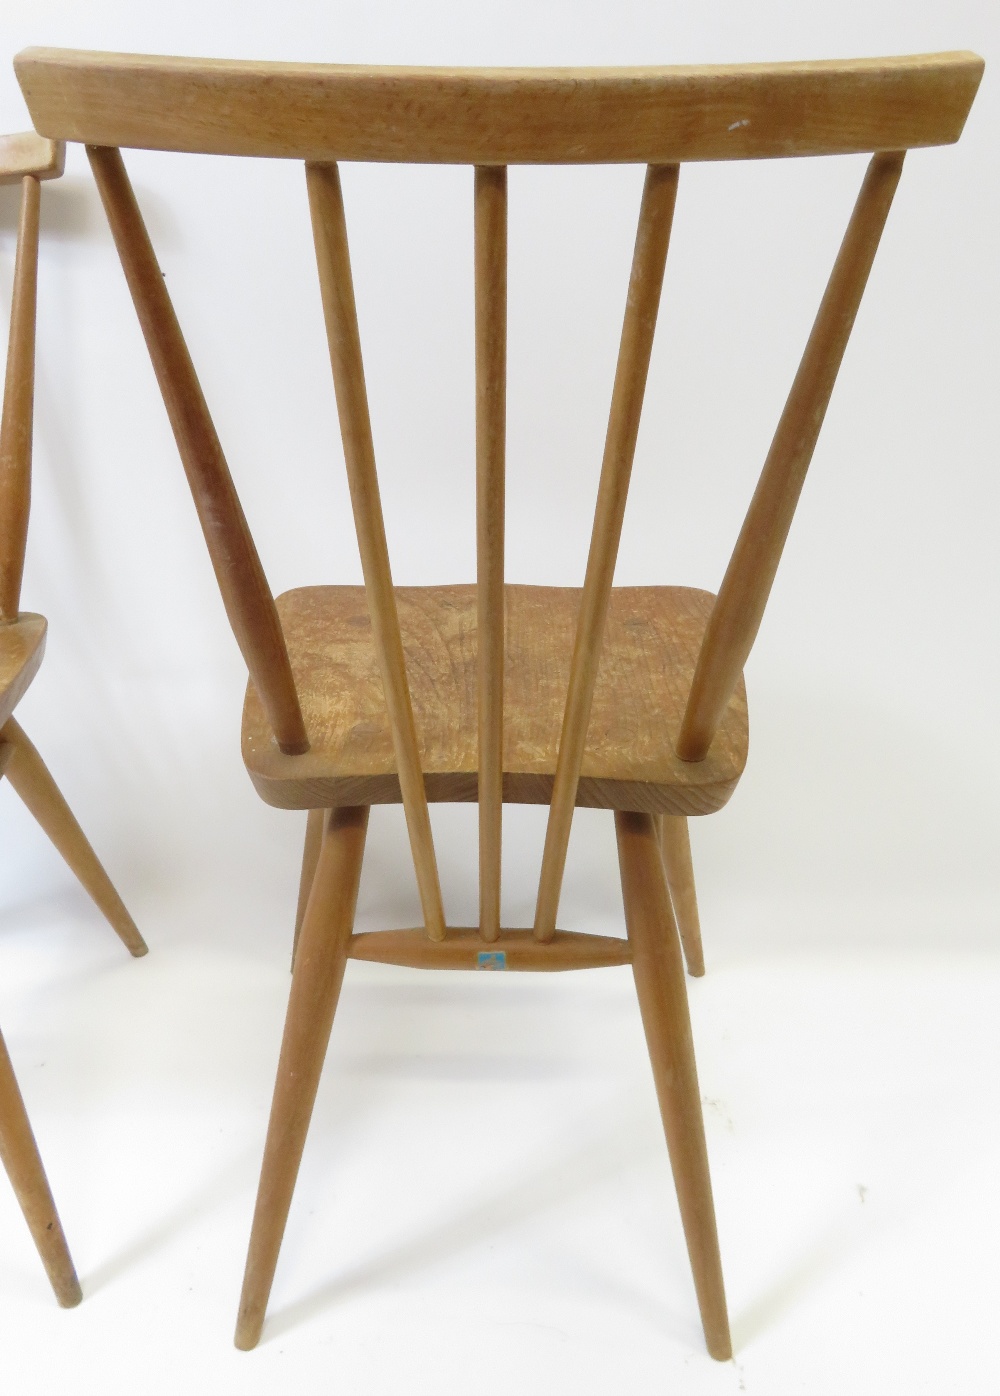 A pair of Ercol light wood stick back chairs - Image 2 of 3